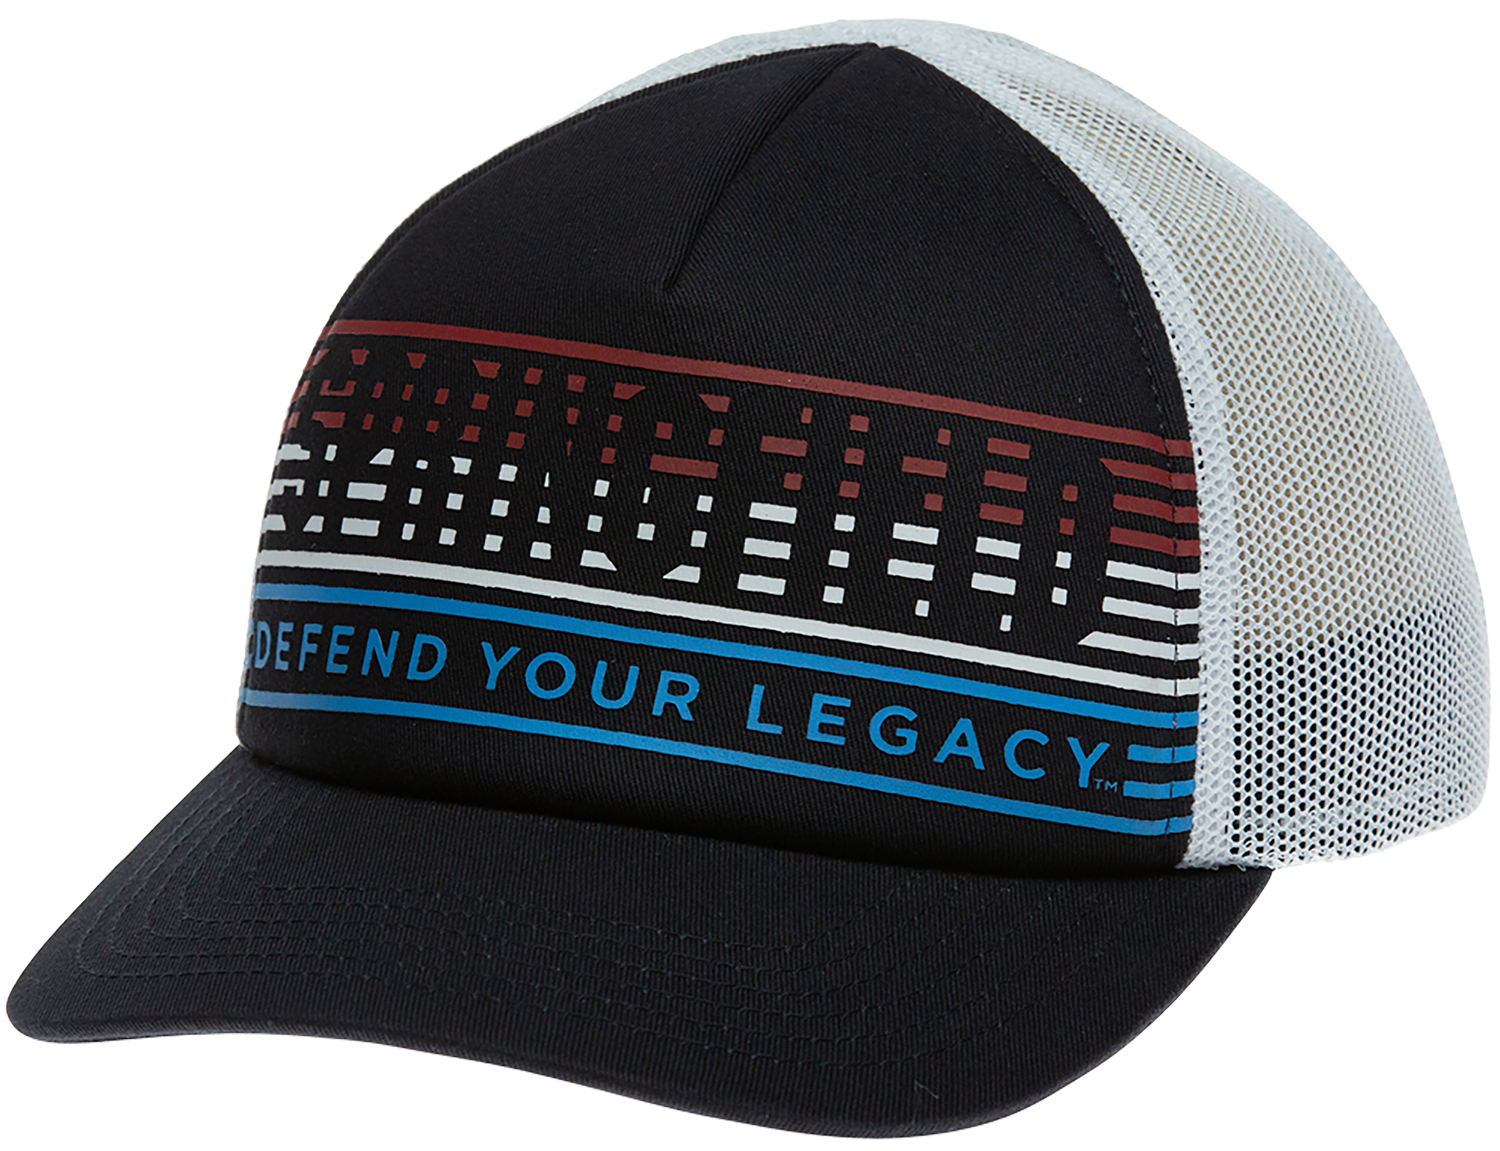 Springfield Armory GEP2380 Retro 80s/90s Trucker Hat Navy/White Adjustable Snapback OSFA Structured